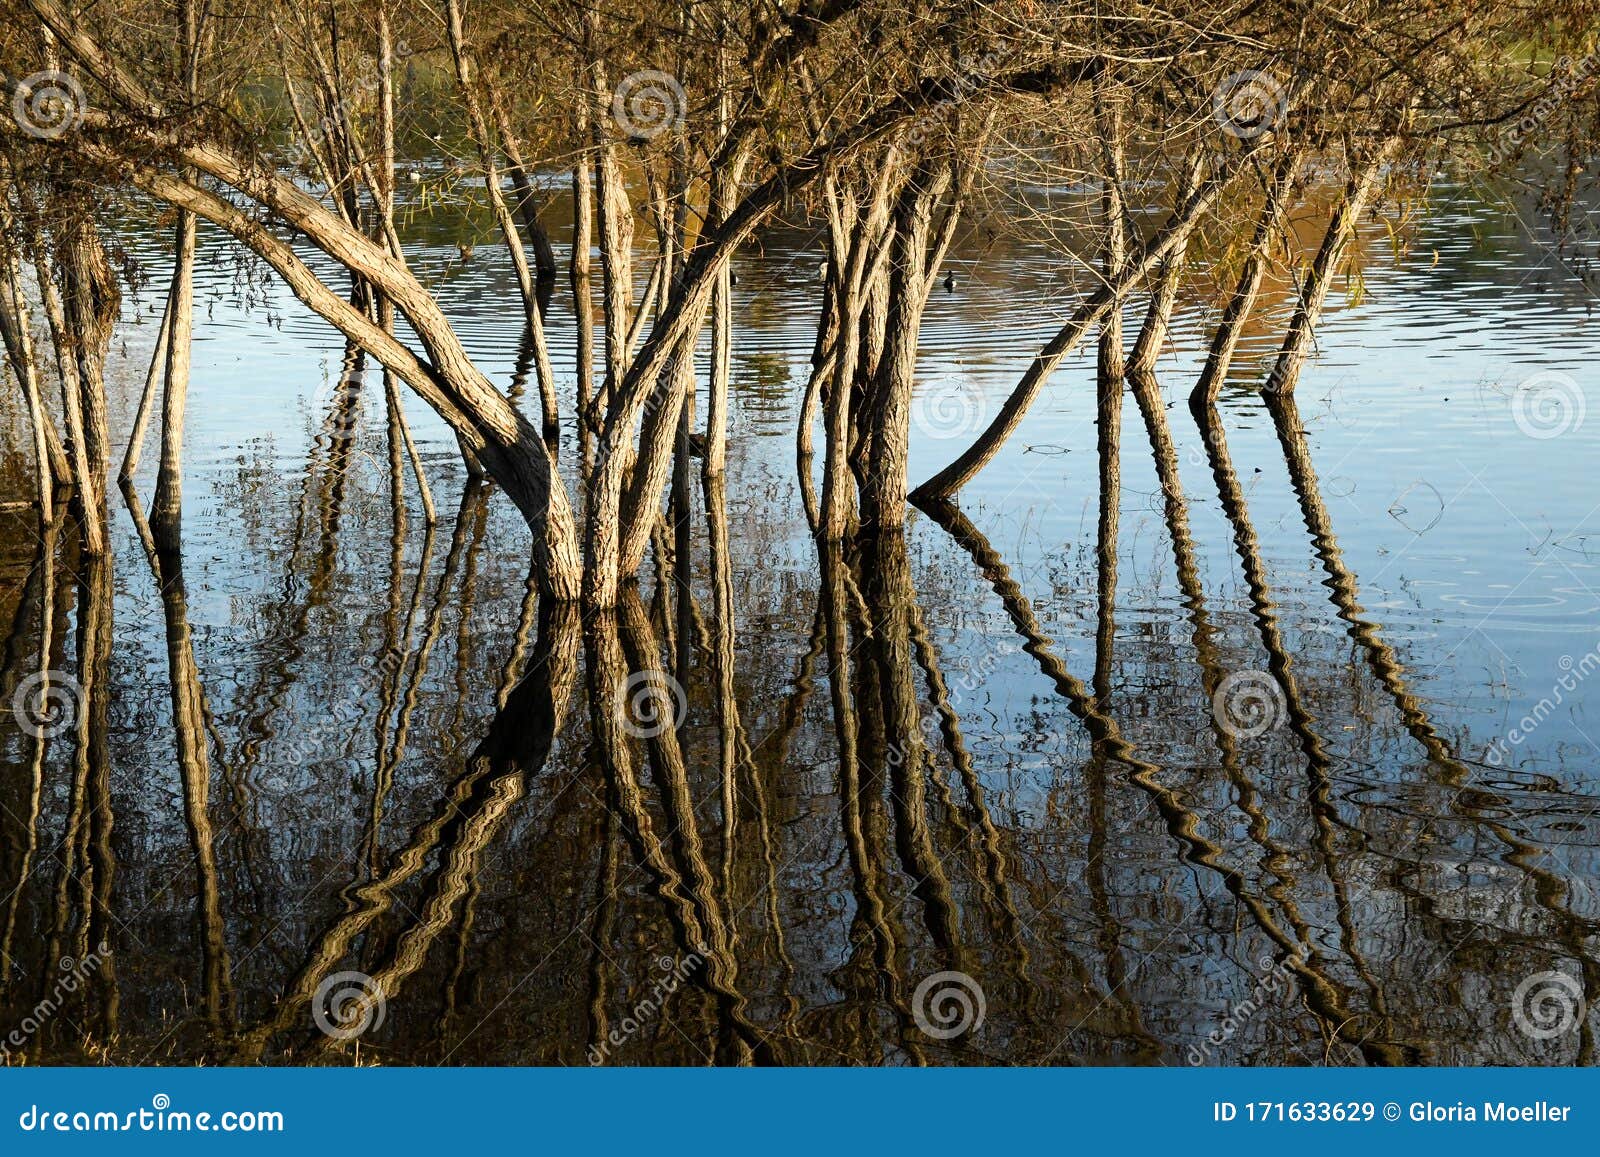 reflection distorted by water ripples at lindo lake